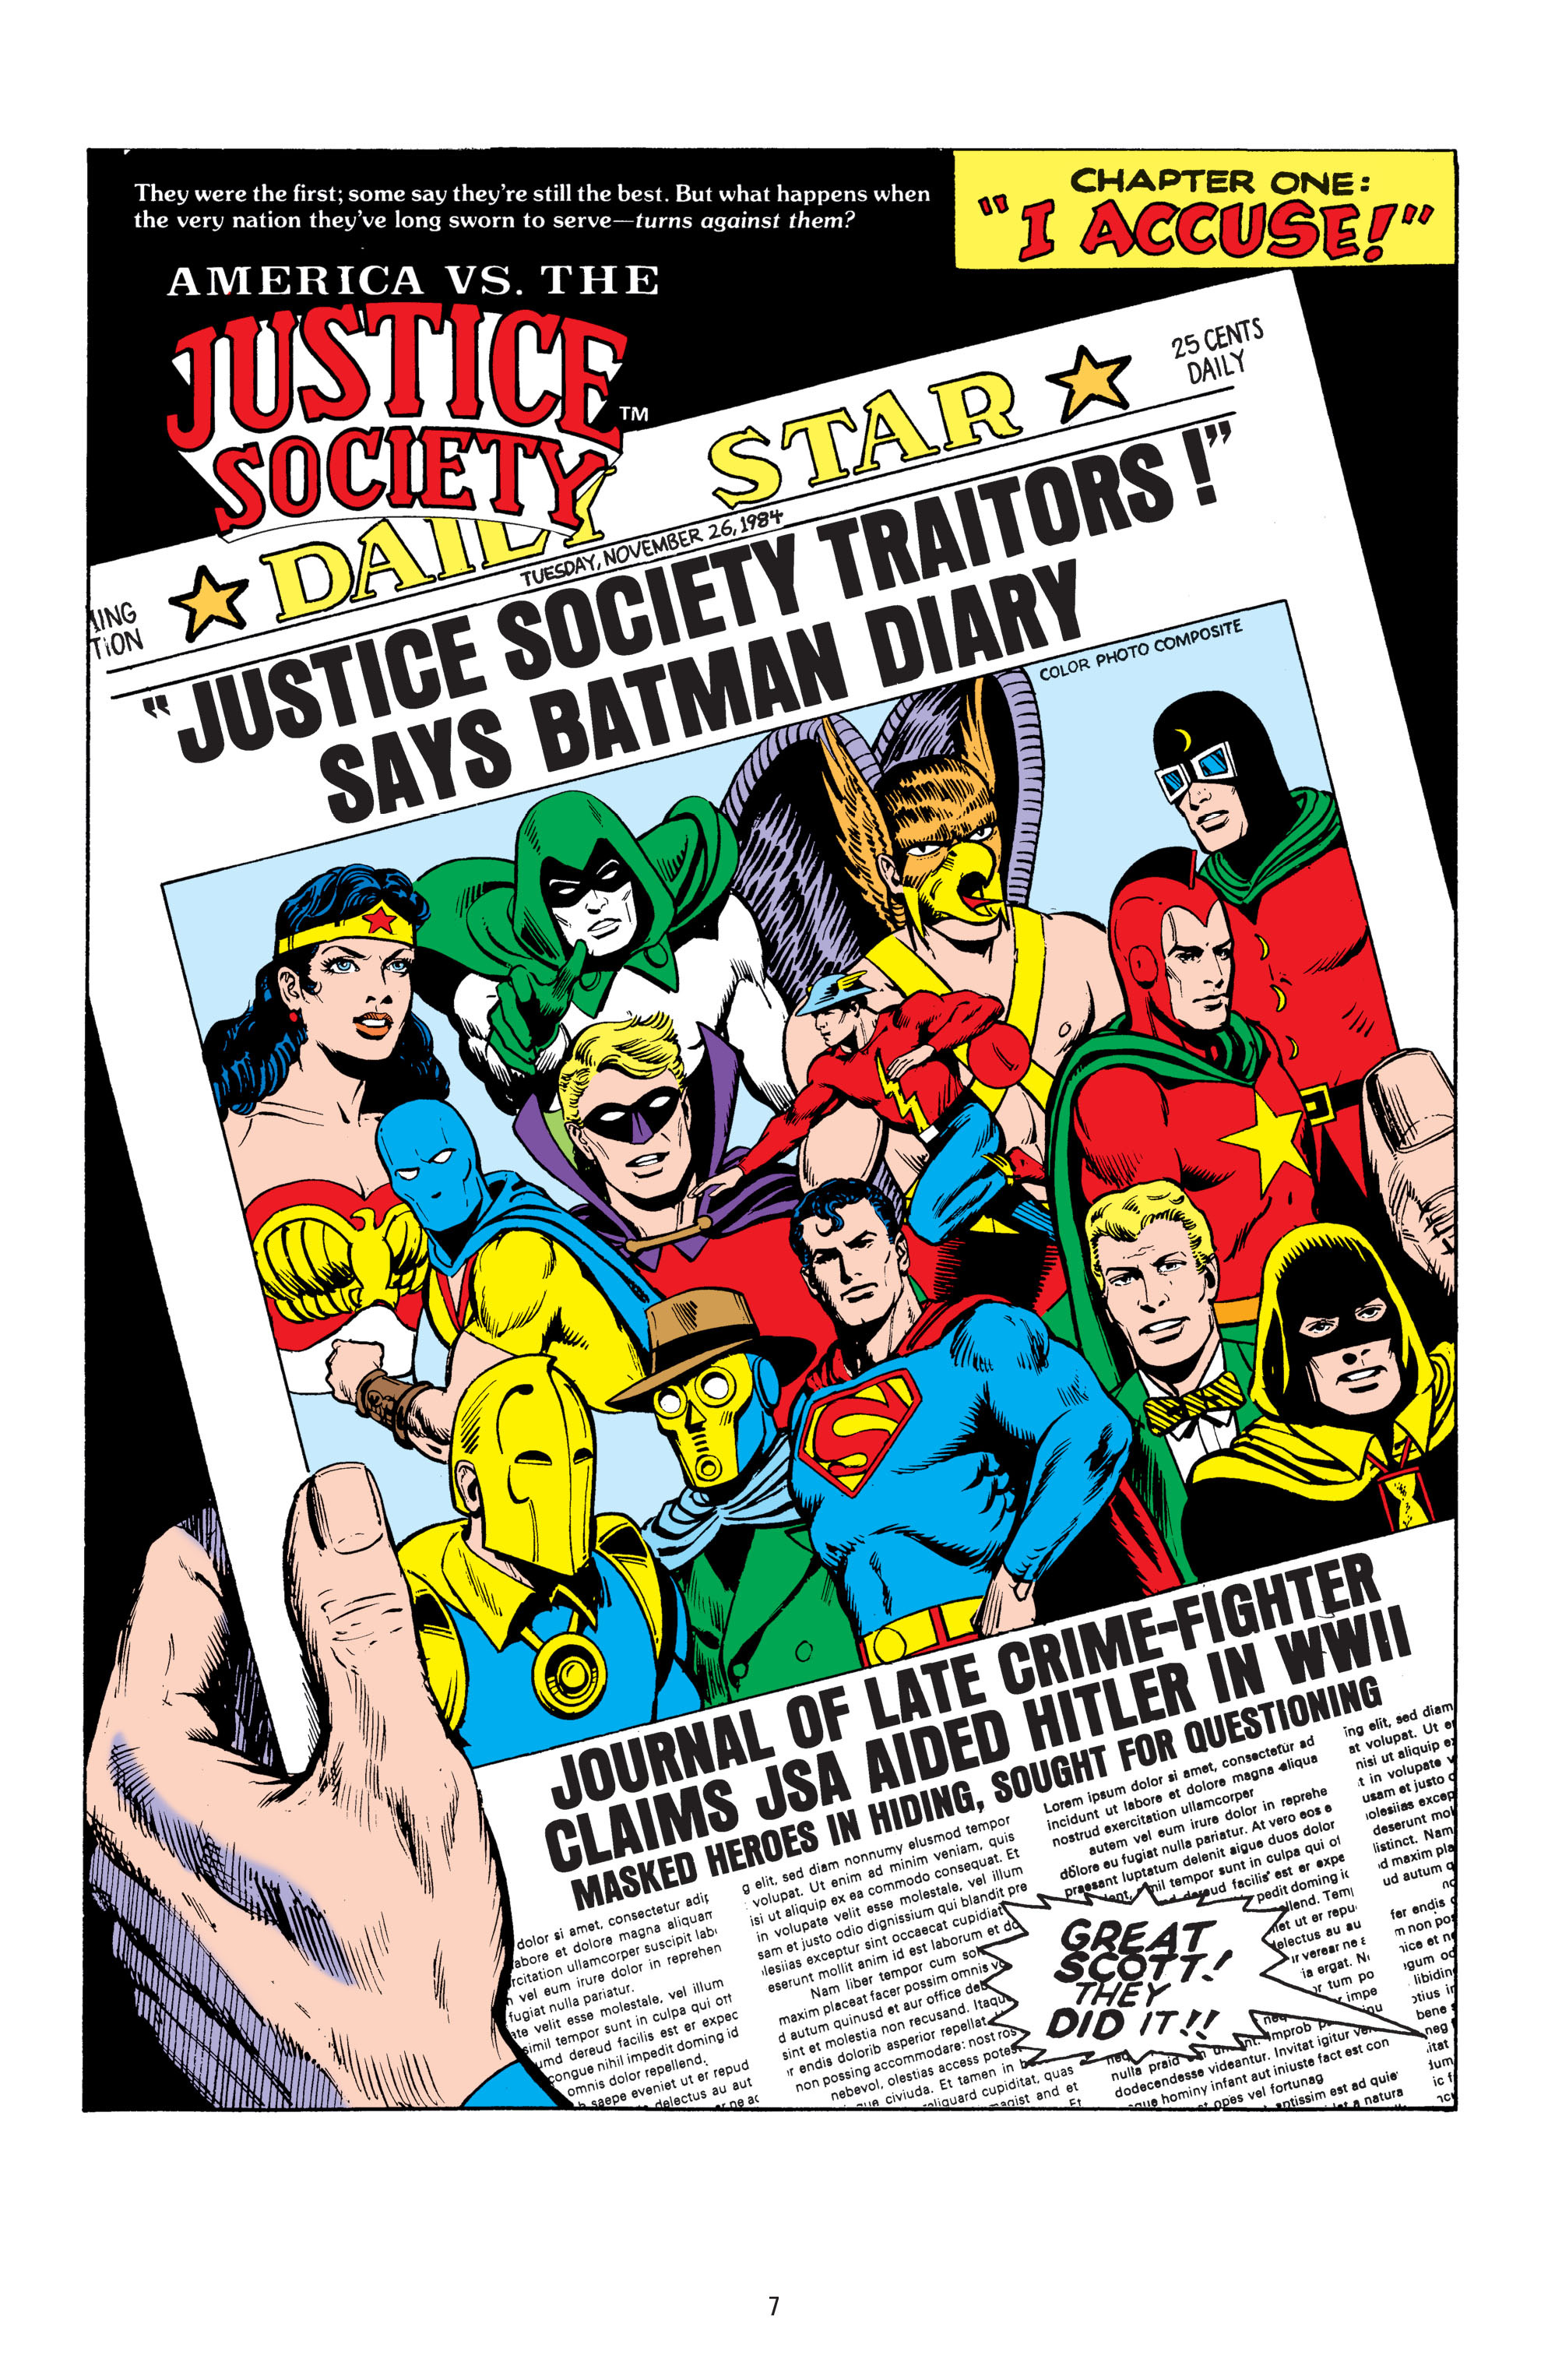 Read online America vs. the Justice Society comic -  Issue # TPB - 8